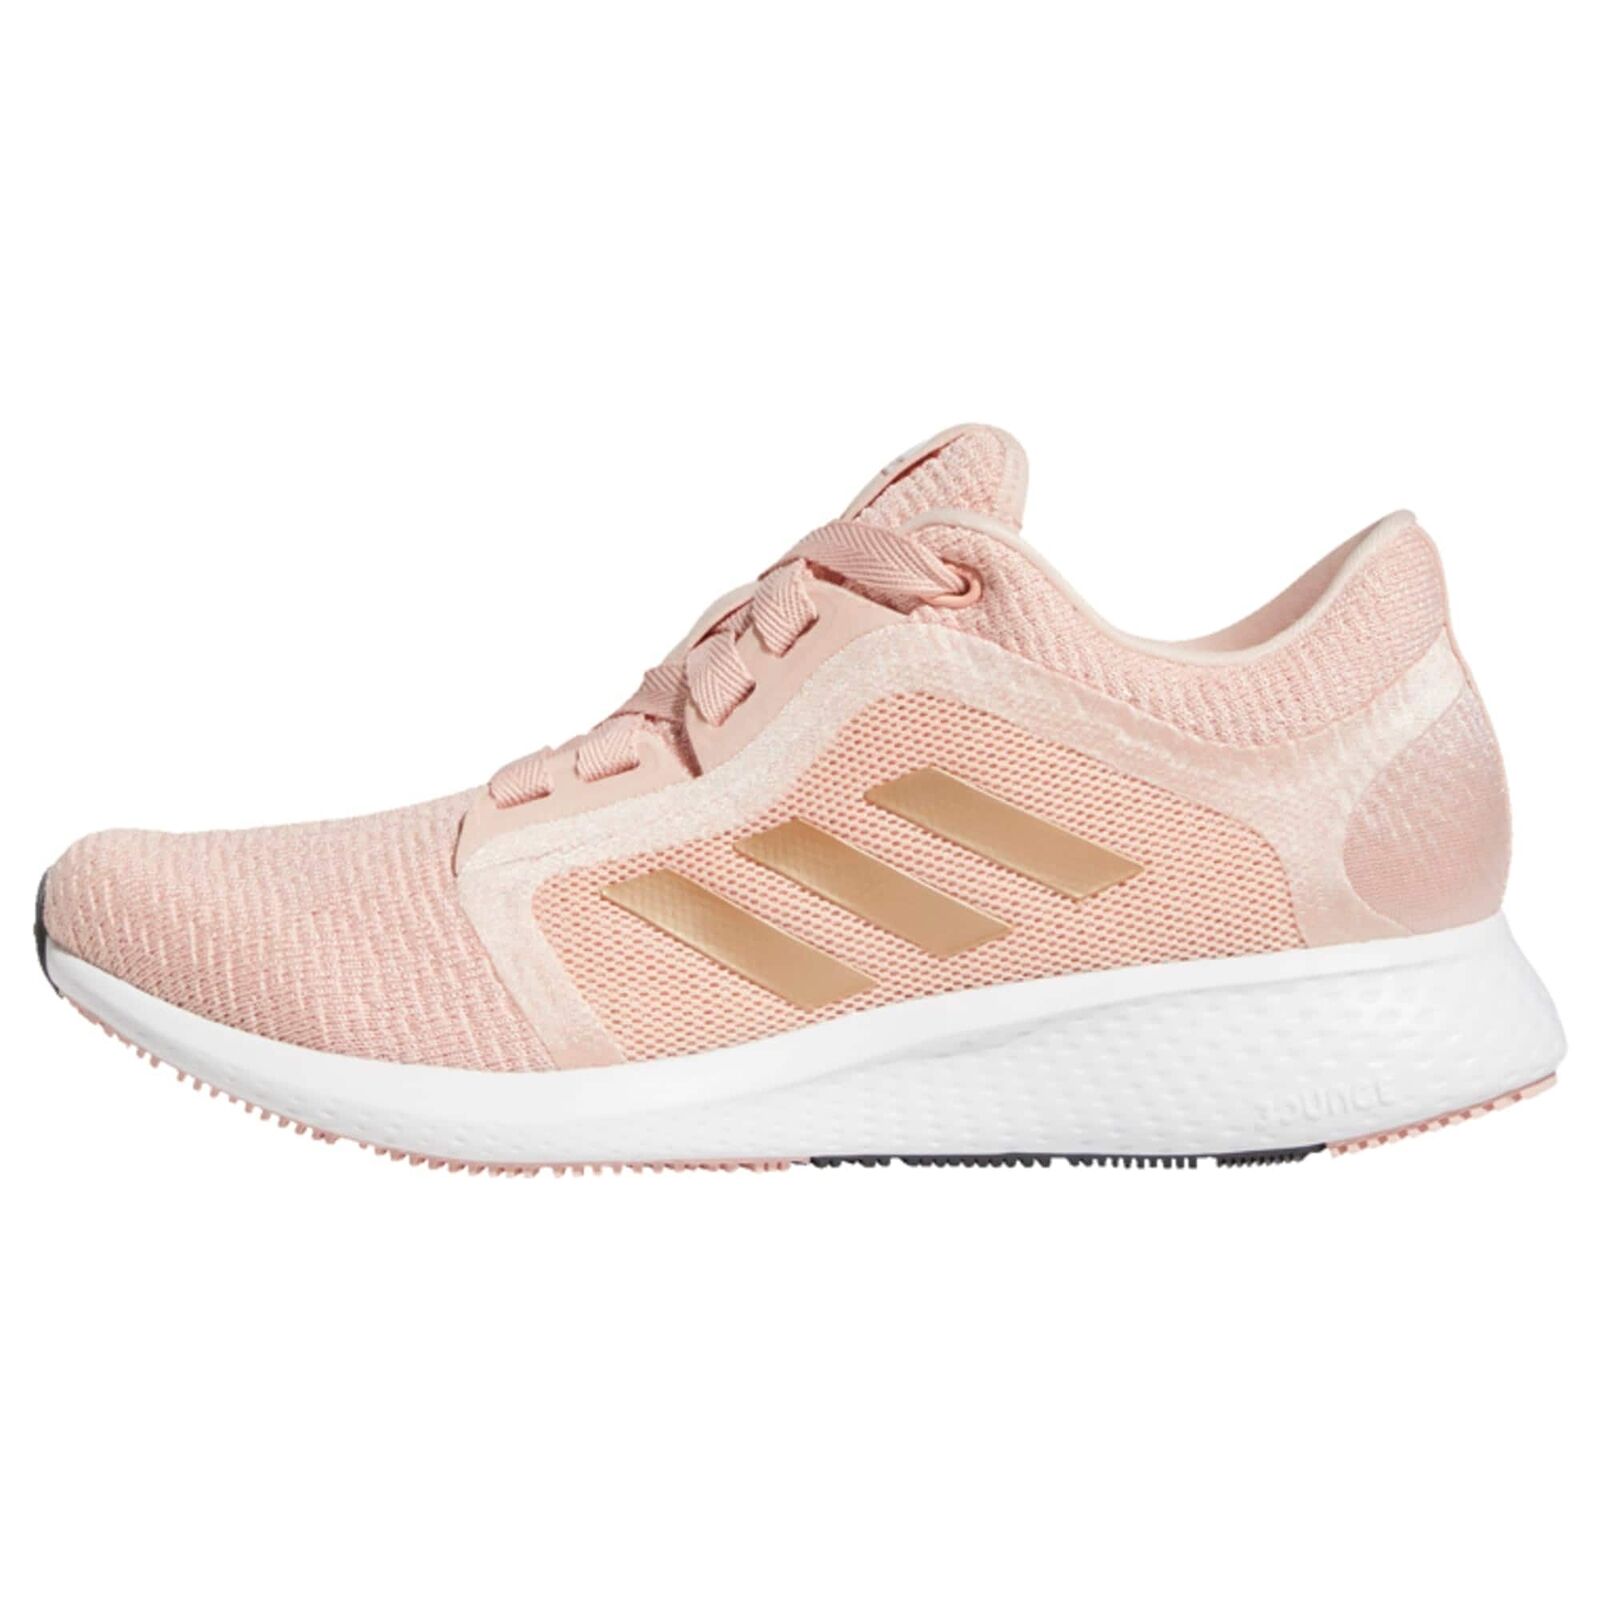 Adidas Edge Lux 4 Training Womens Training Sneakers Shoes